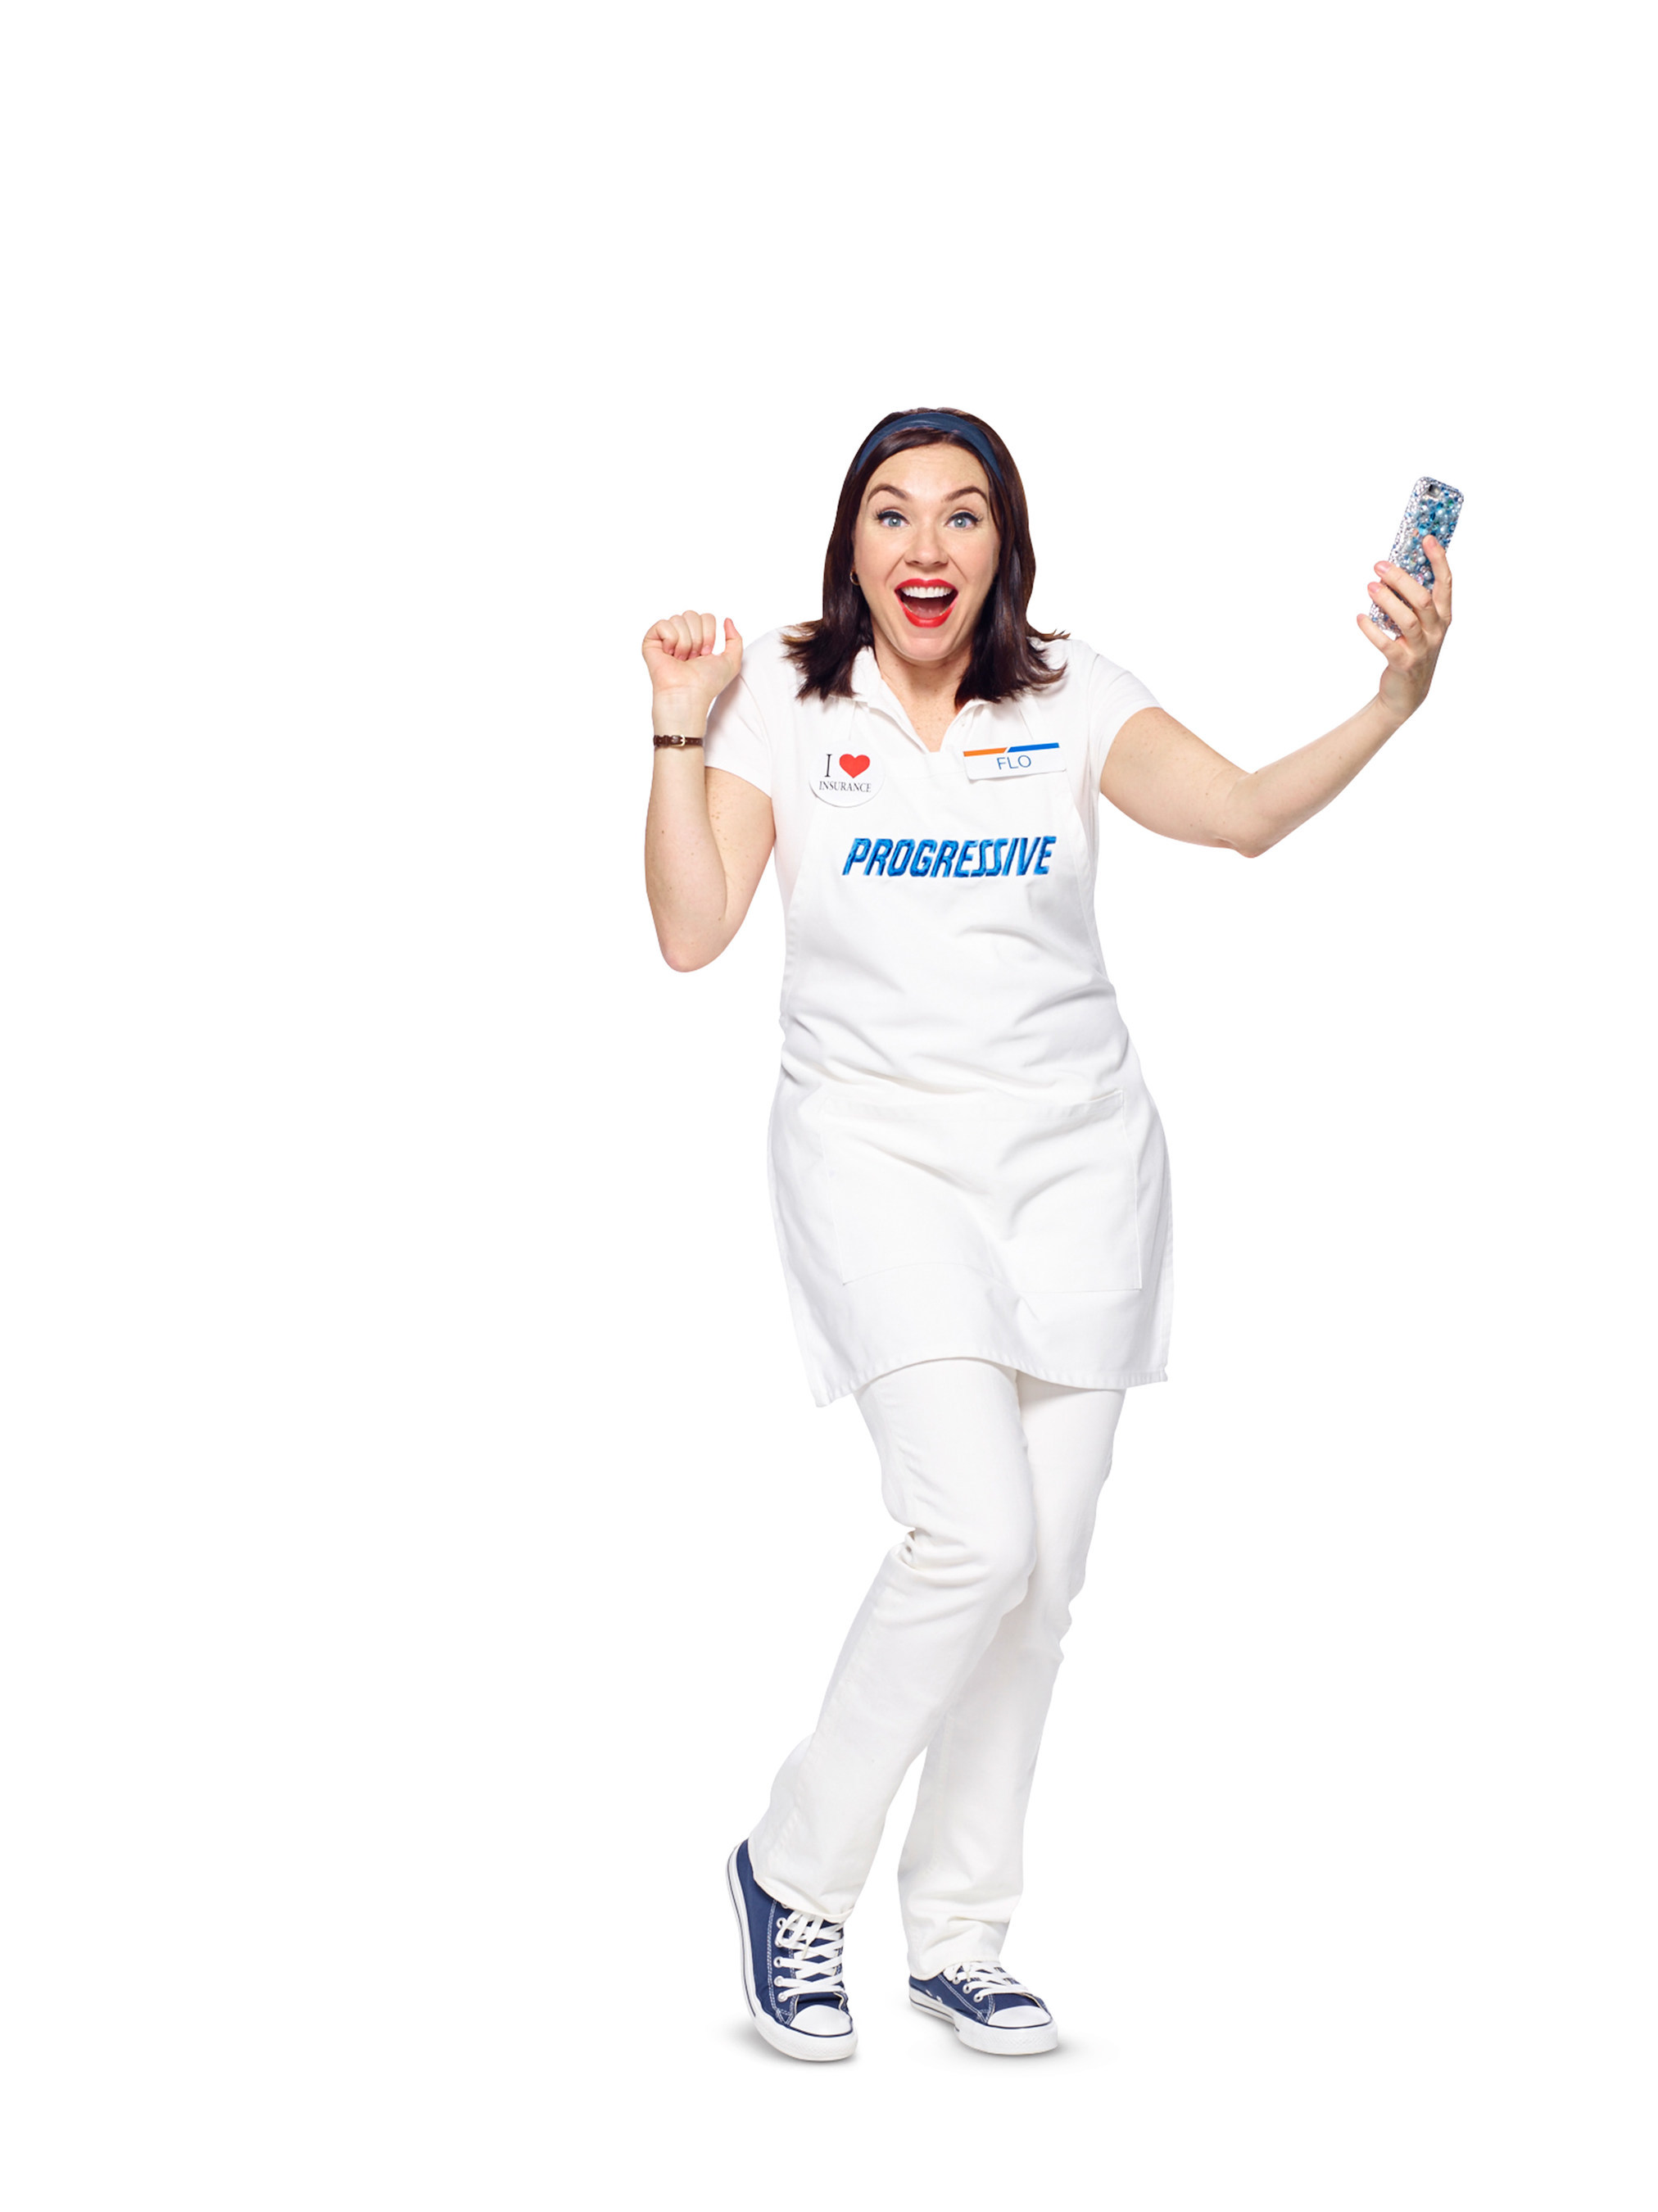 Want to chat with Flo? Progressive Announces New Auto Insurance Bot - Oct  17, 2017